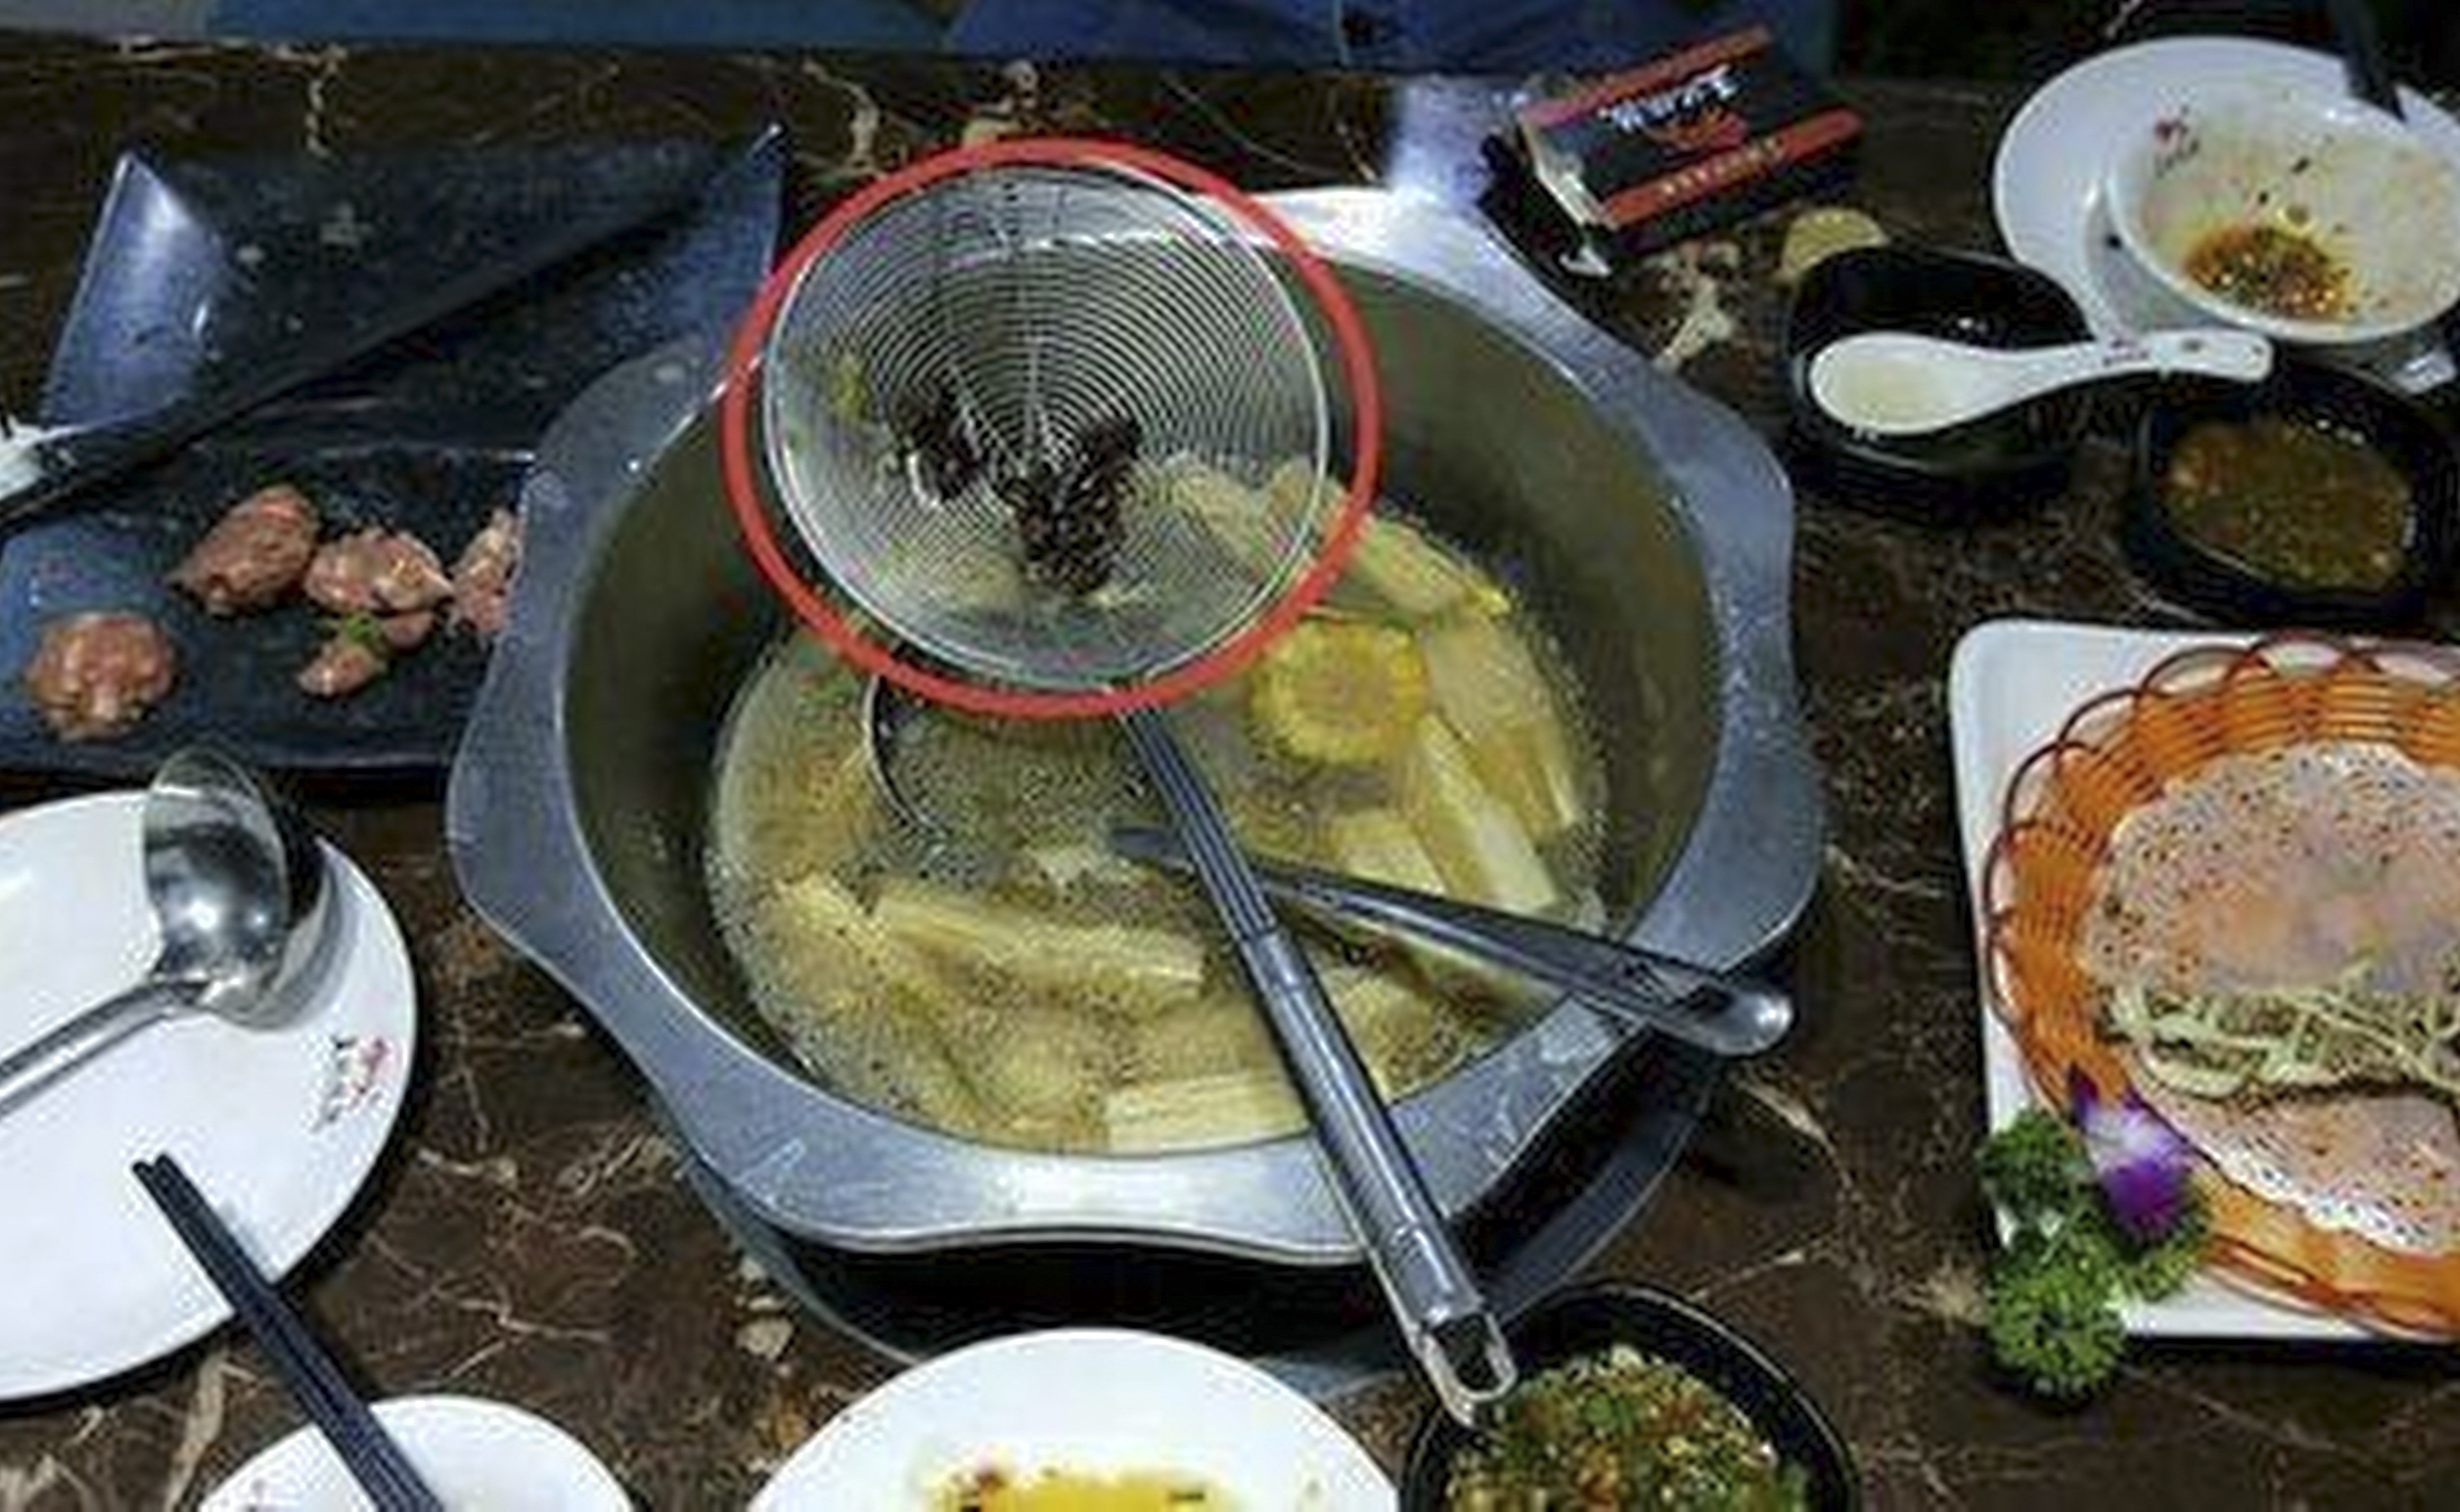 Two women from southern China said they found eight dead cockroaches in their hotpot. Photo: News.163.com